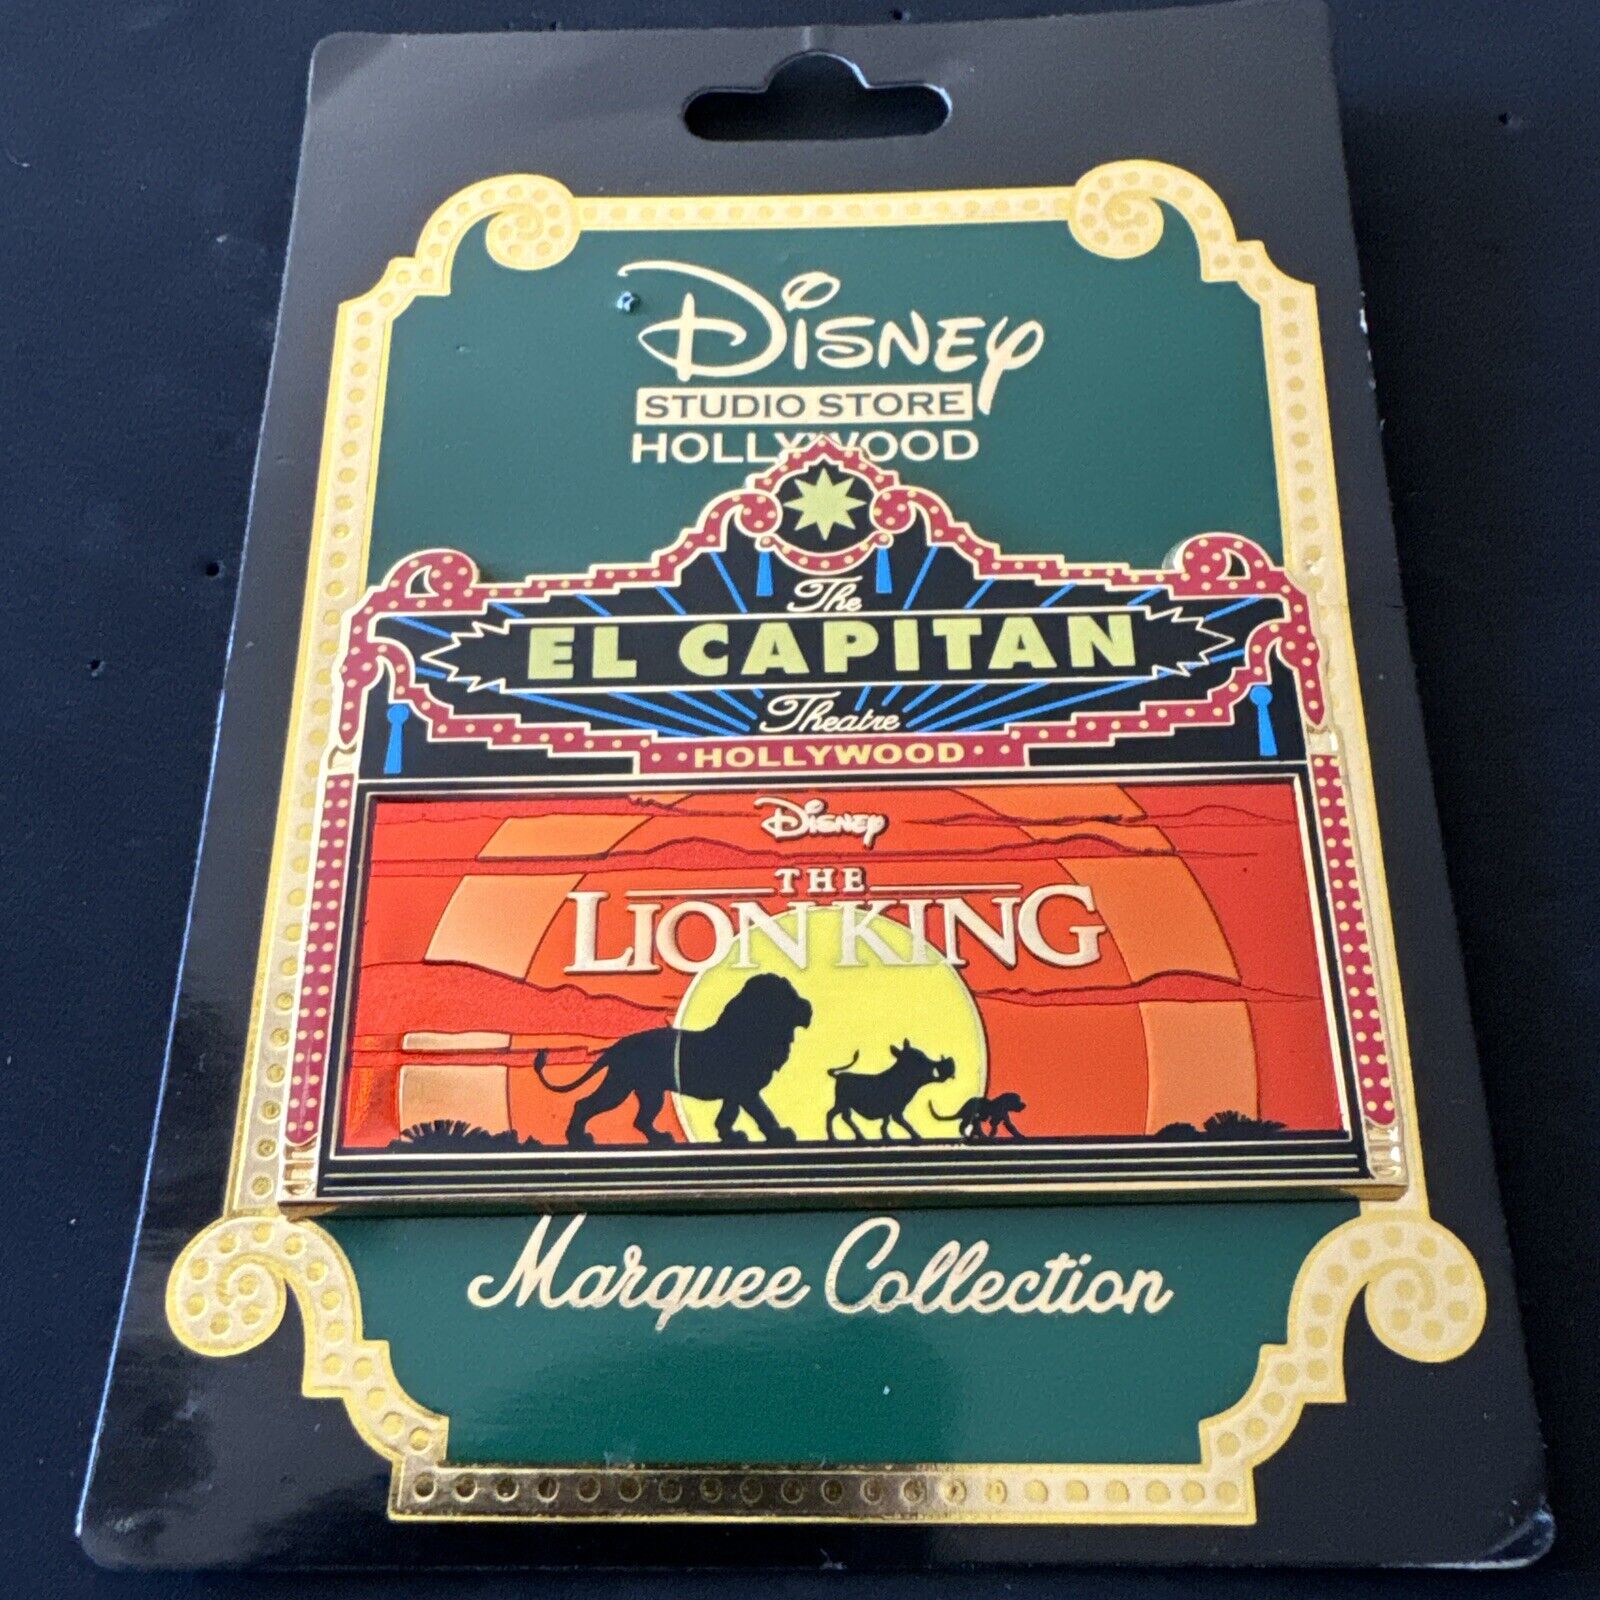 Disney DSSH DSF The Lion King Live Action 4 Pin Set LE 300 7/19  Marquee